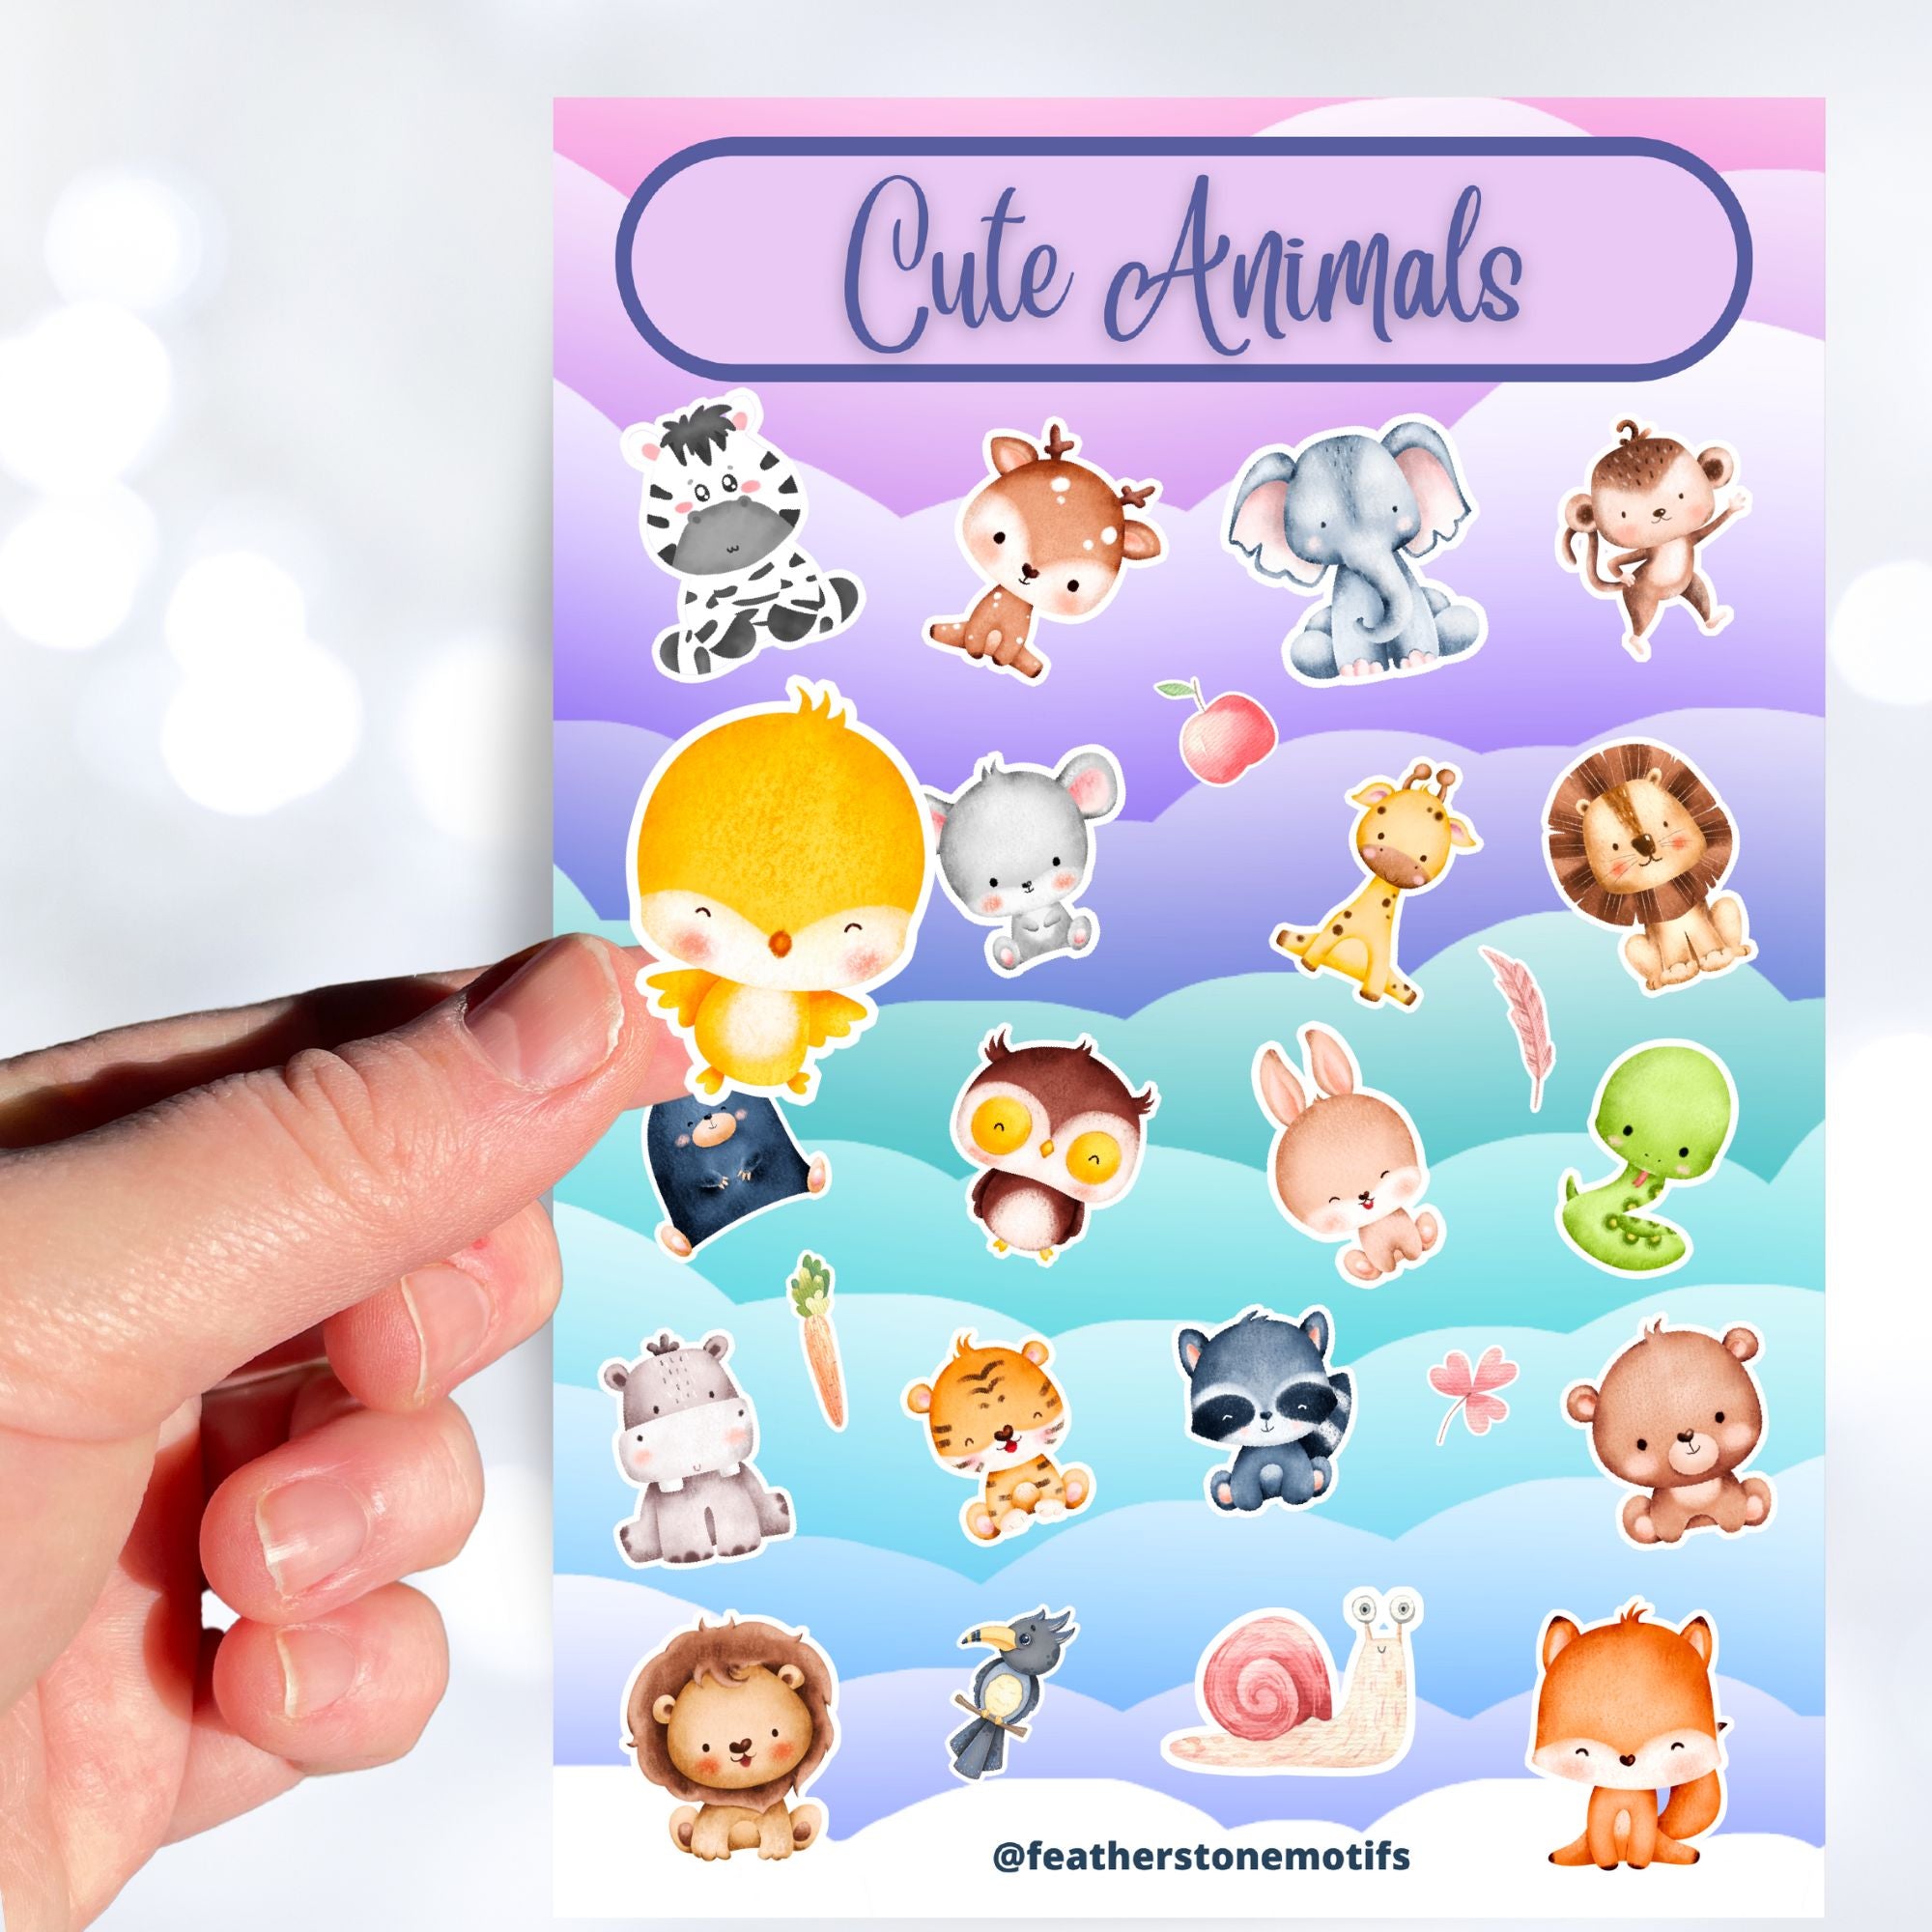 This sticker sheet has a sparkle overlay and it features stickers of cute baby animals from a bear to a zebra, with birds, lions, a monkey, and even snakes and snails in between. This image shows a hand holding a baby bird sticker above the sticker sheet.